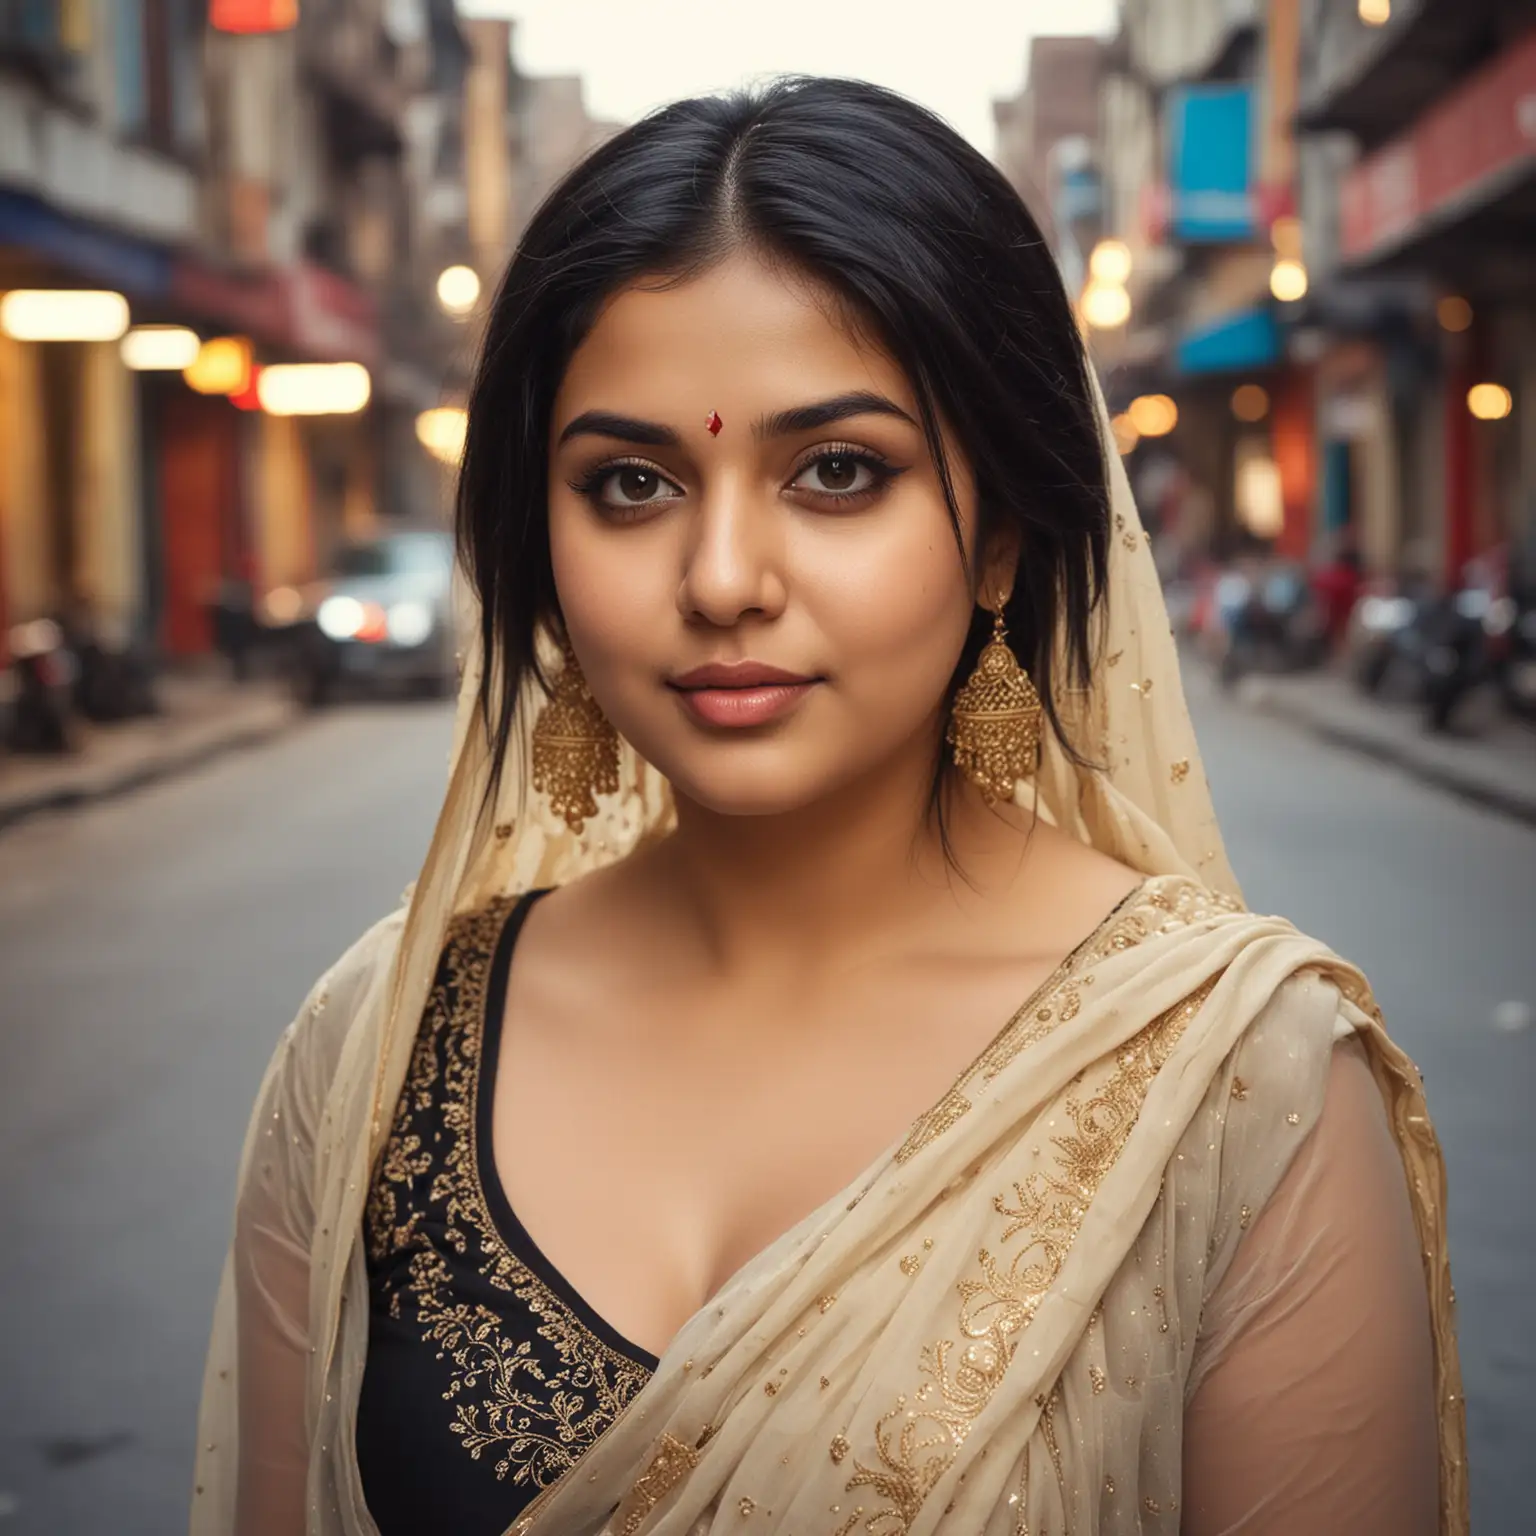 (((Desi Girl))), chubby face, Natural Skin, Wearing a hot deep necktop and dupatta, Attractive black hair, ((The ends of the hair are blonde)), city street background, Bokeh